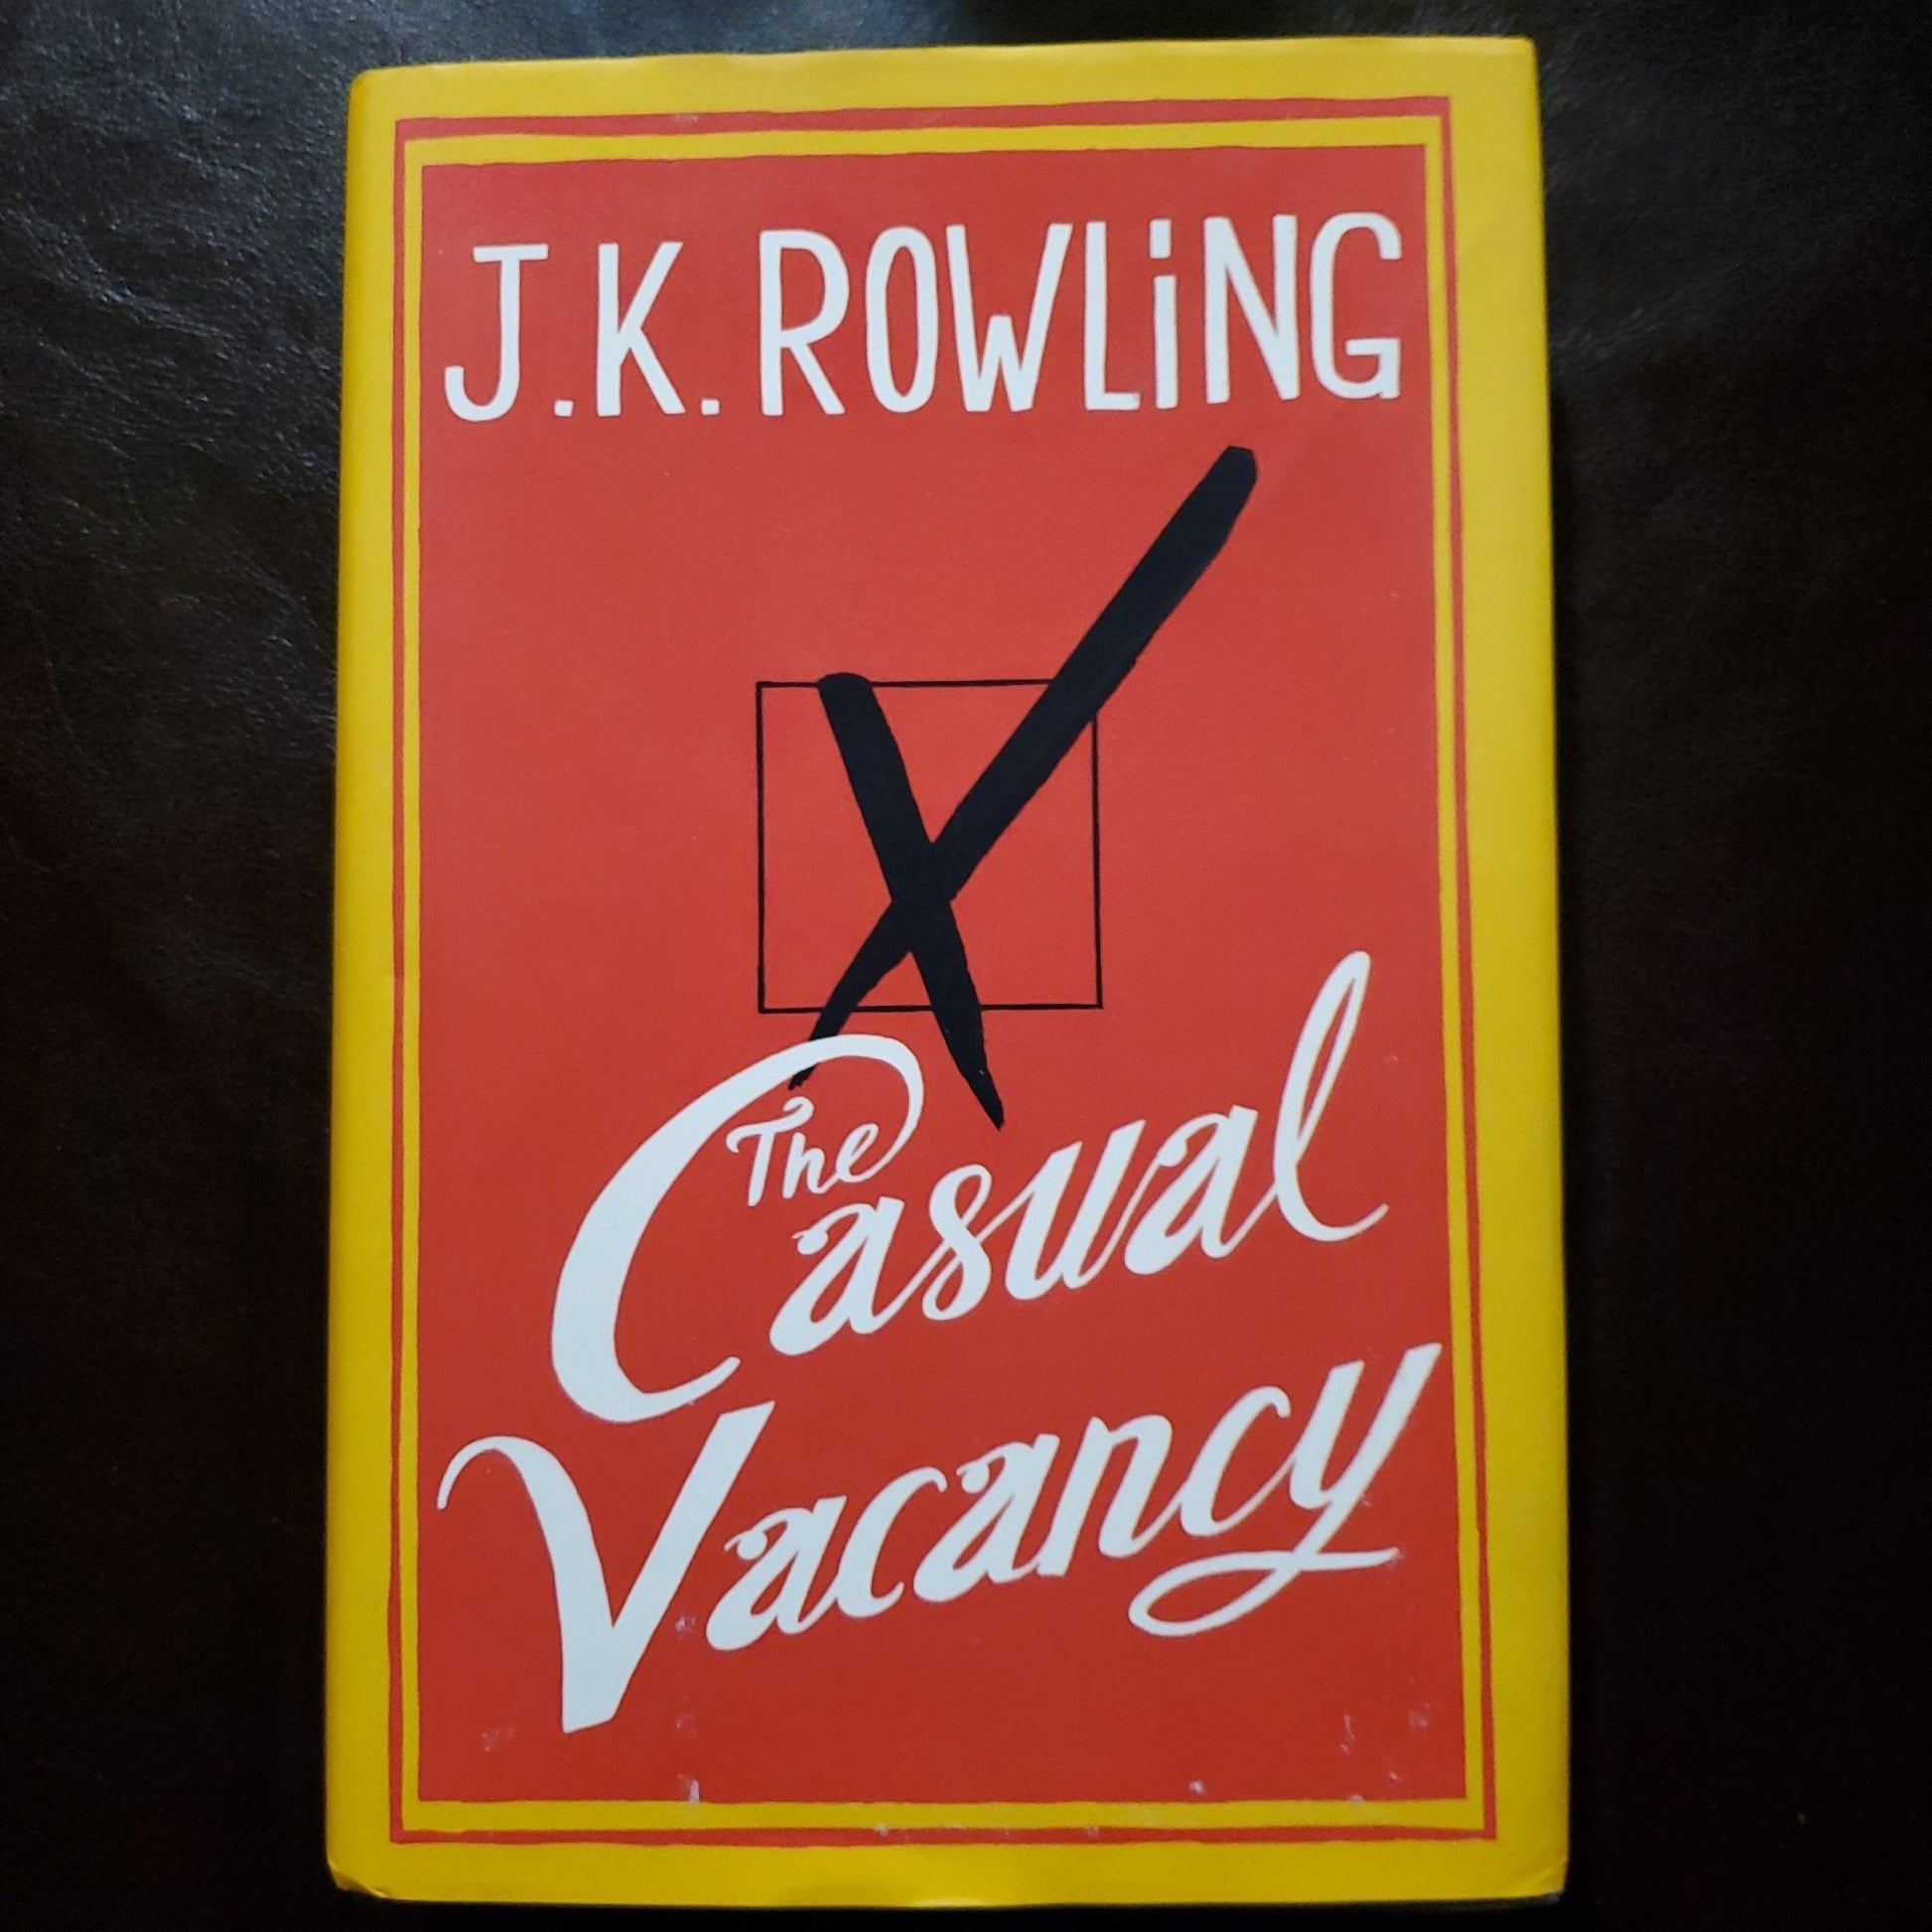 The Casual Vacancy - [ash-ling] Booksellers